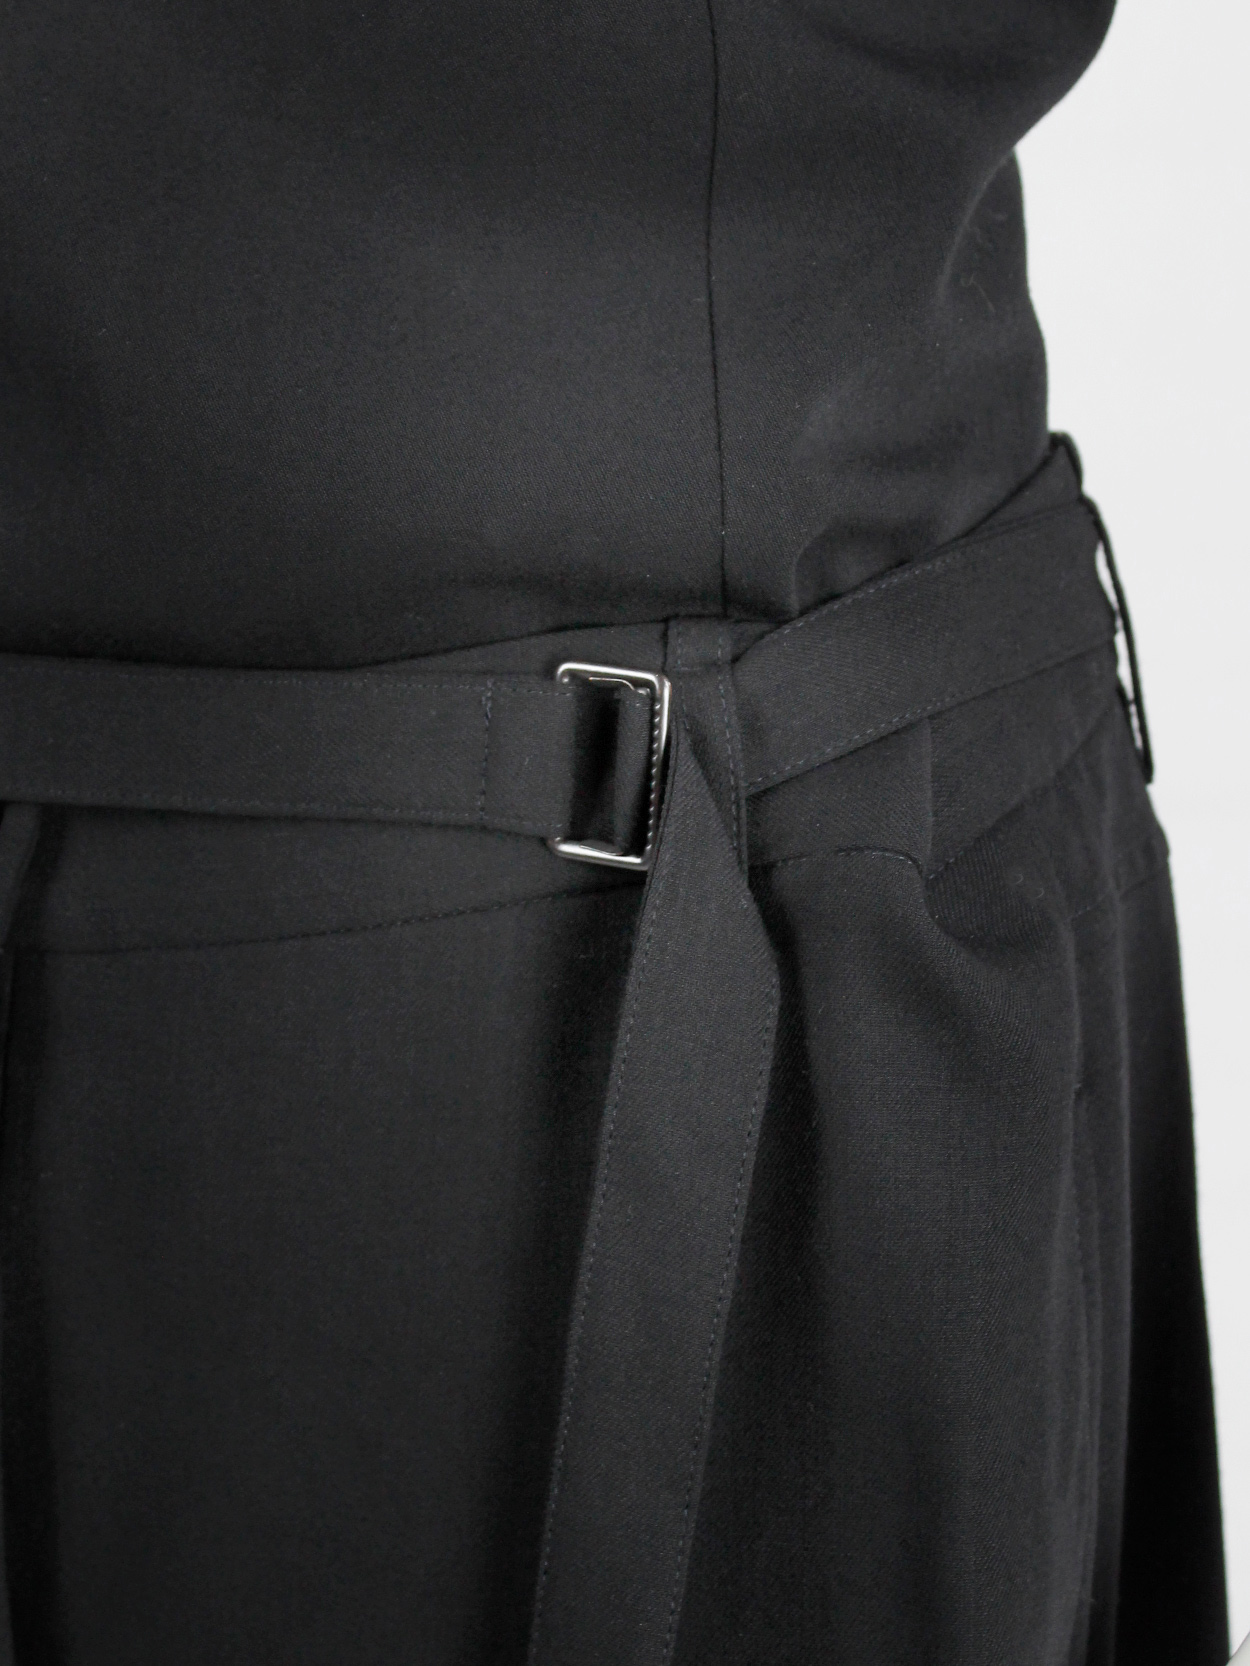 Ann Demeulemeester black wide trousers with belt buckle strap — fall ...